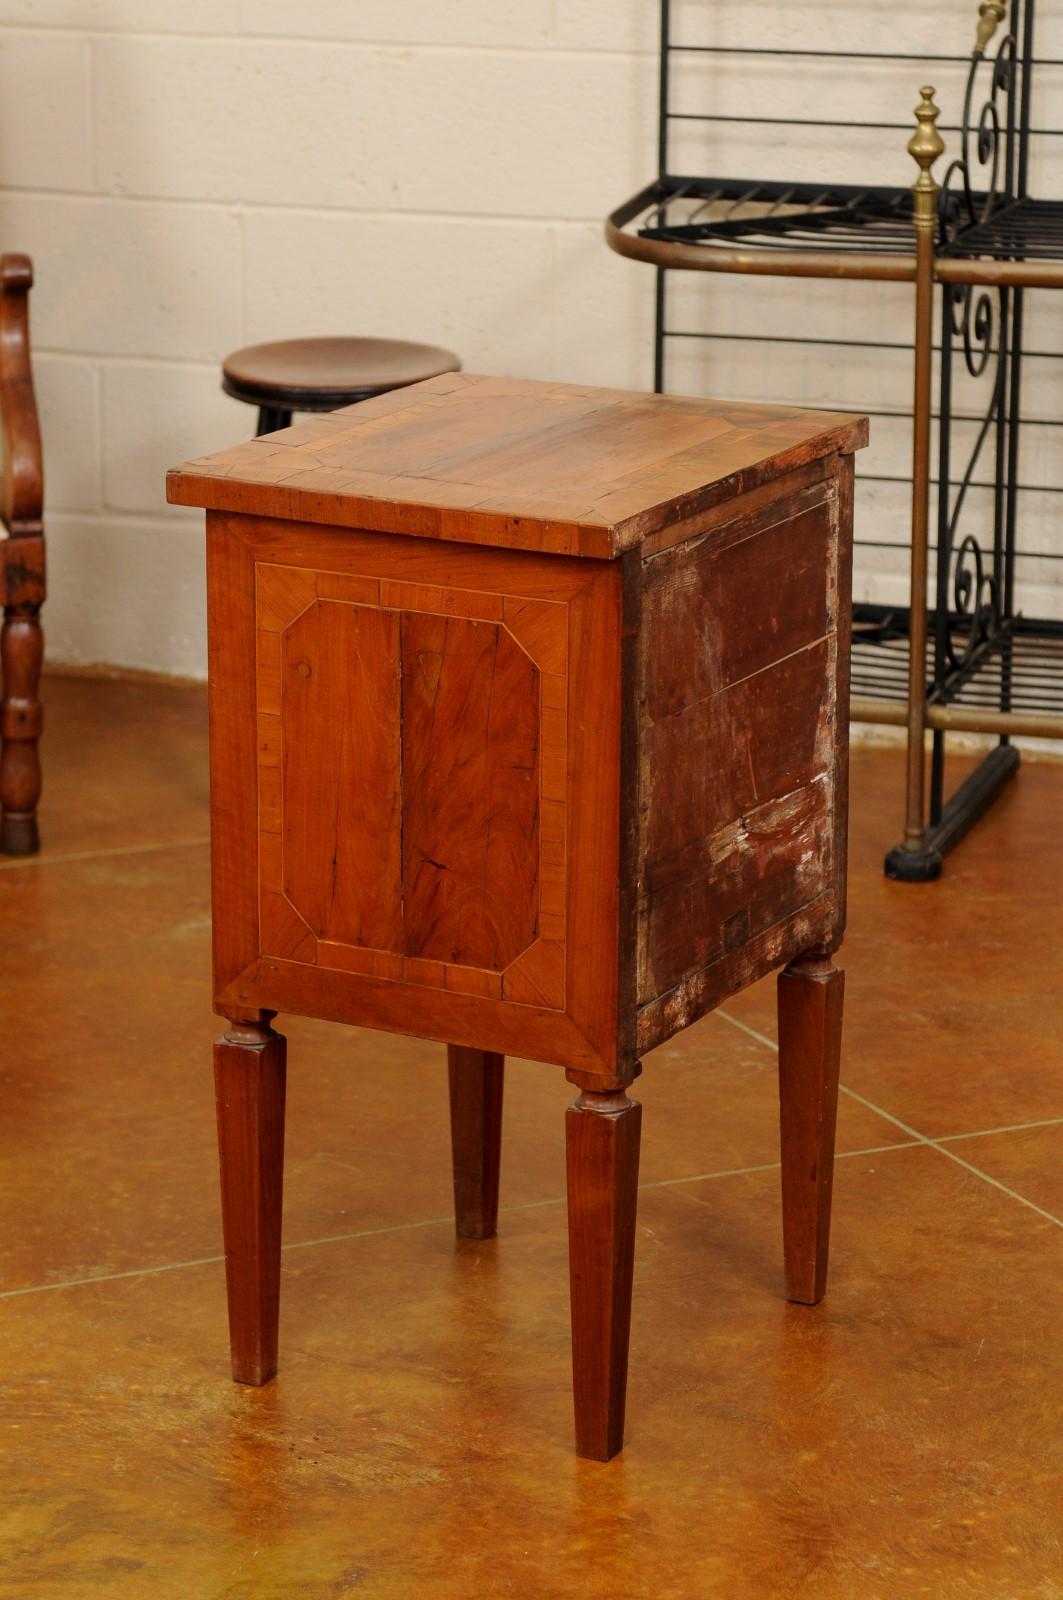 Neoclassical Walnut Commodino with Cabinet Door, Early 19th Century Italy For Sale 6